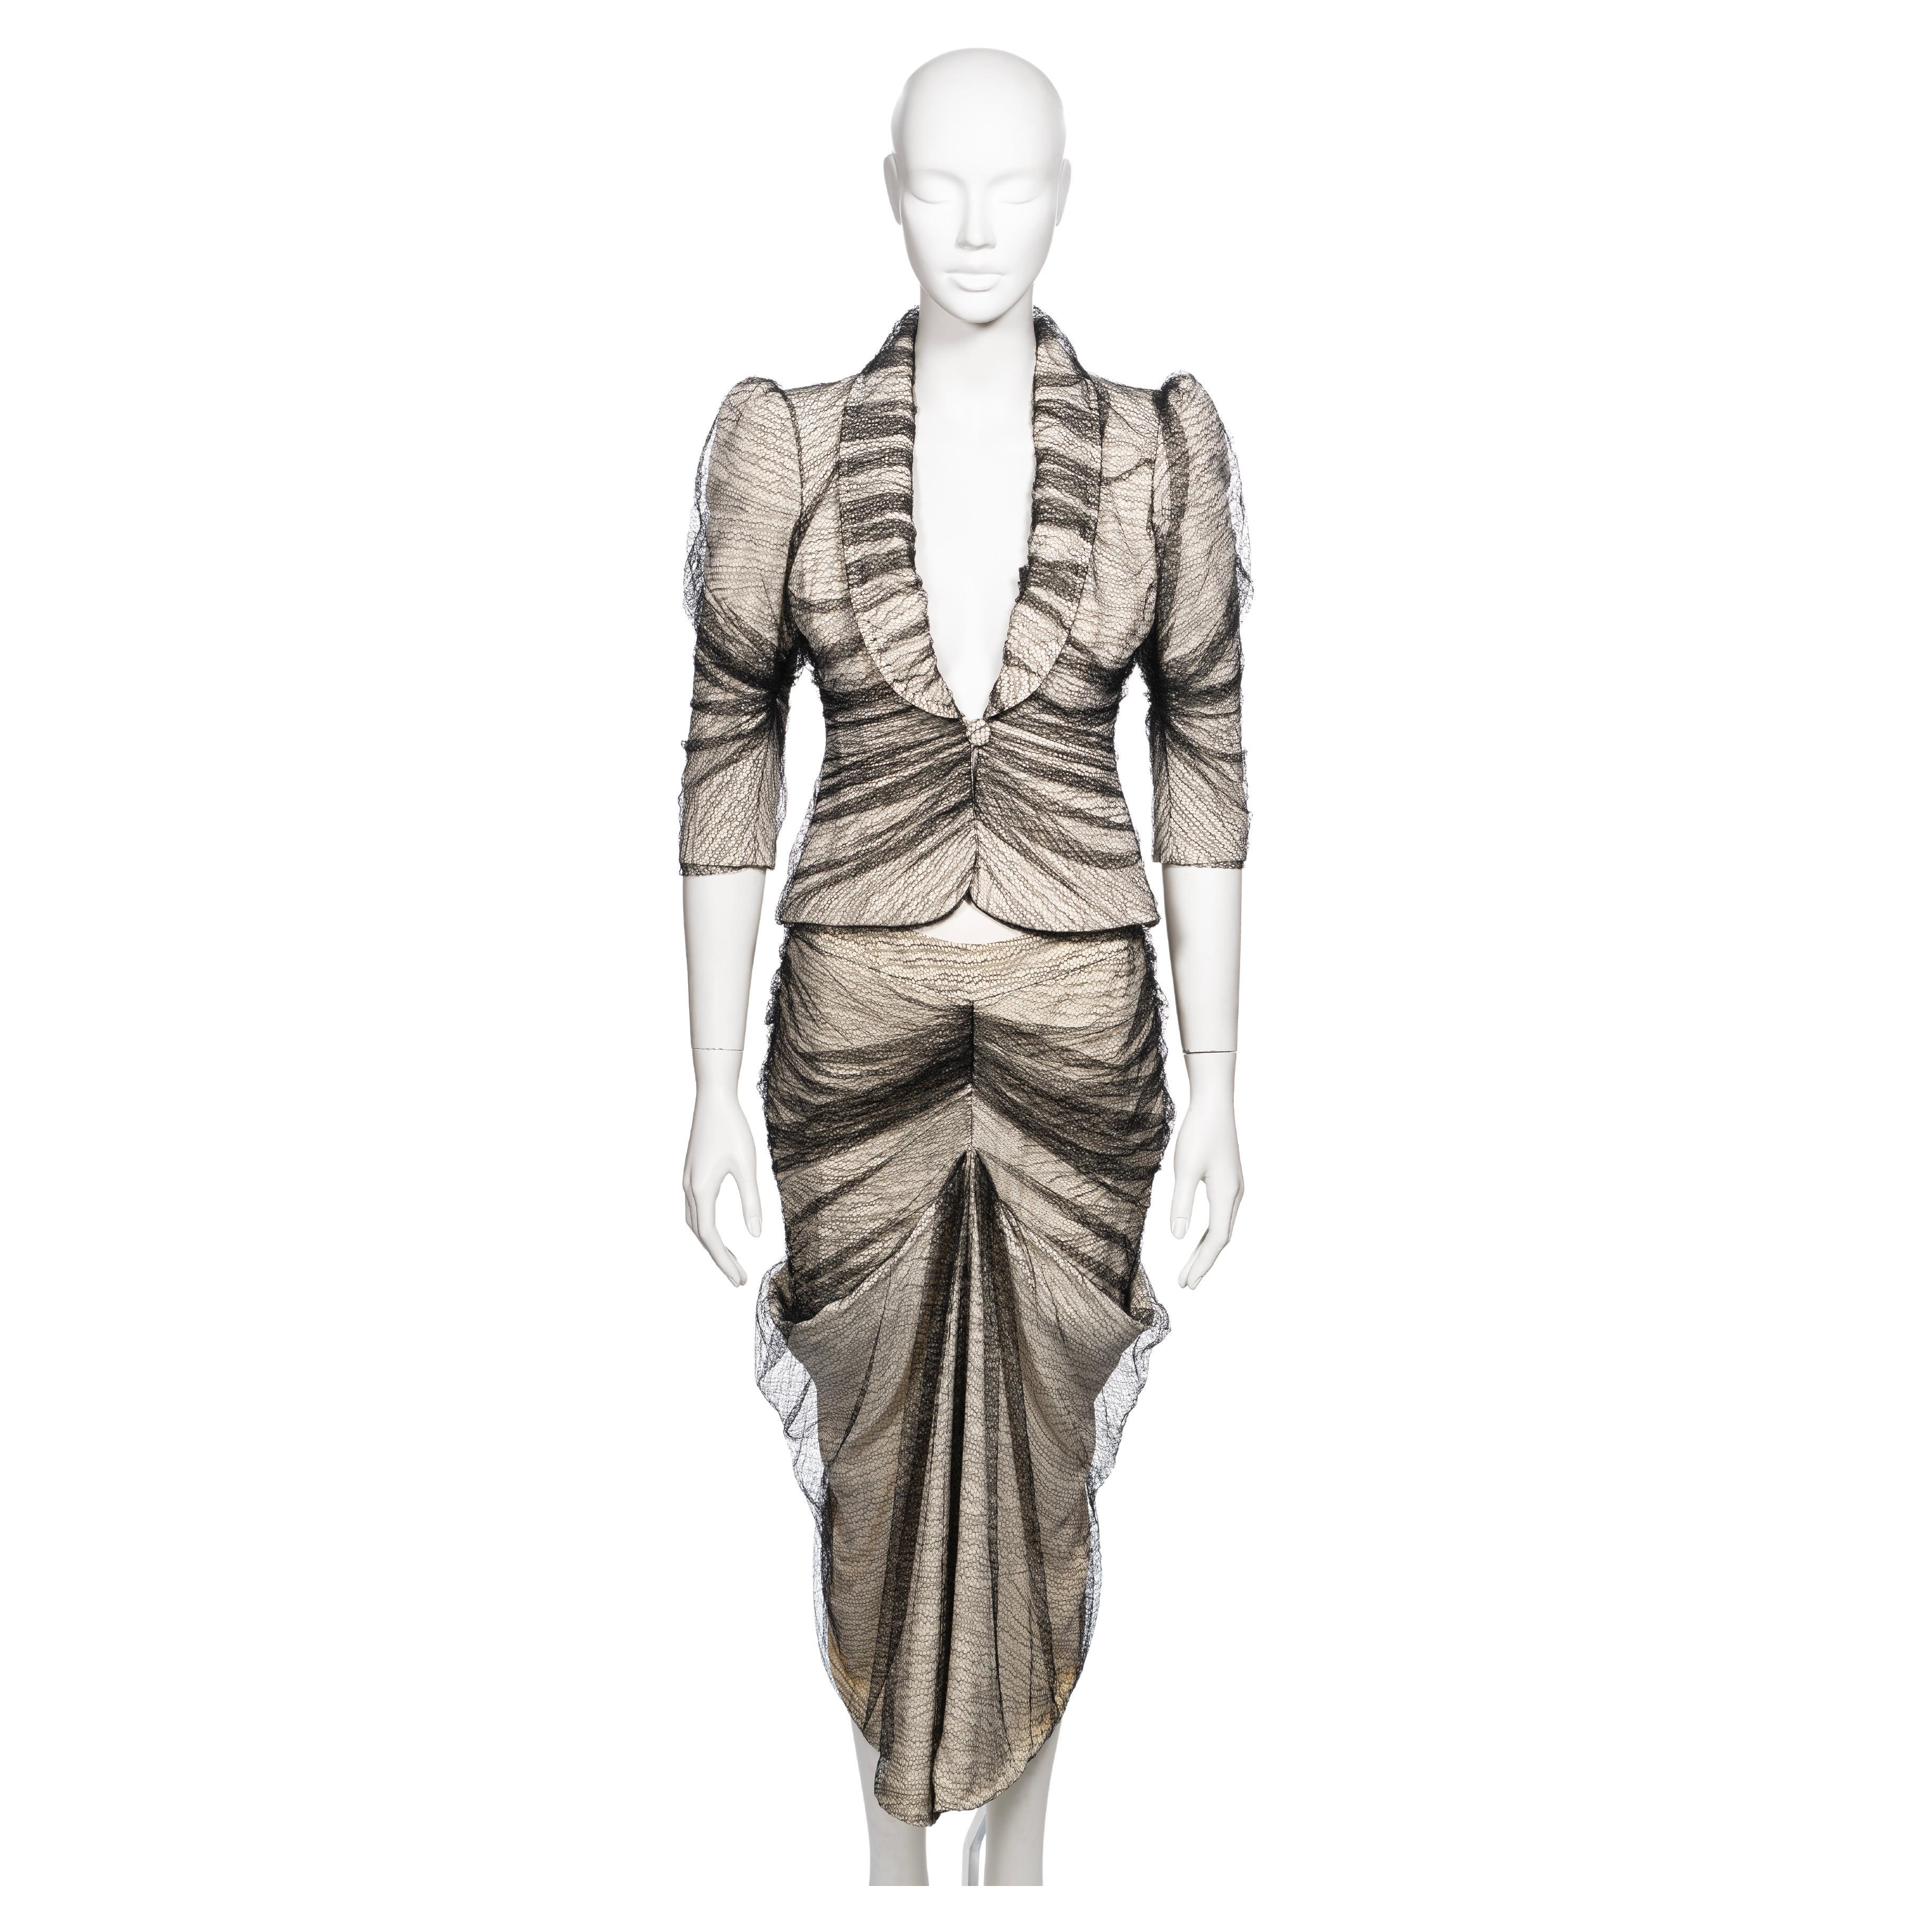 Alexander McQueen 'Sarabande' Ivory Skirt Suit with Black Lace Overlay, SS 2007 For Sale